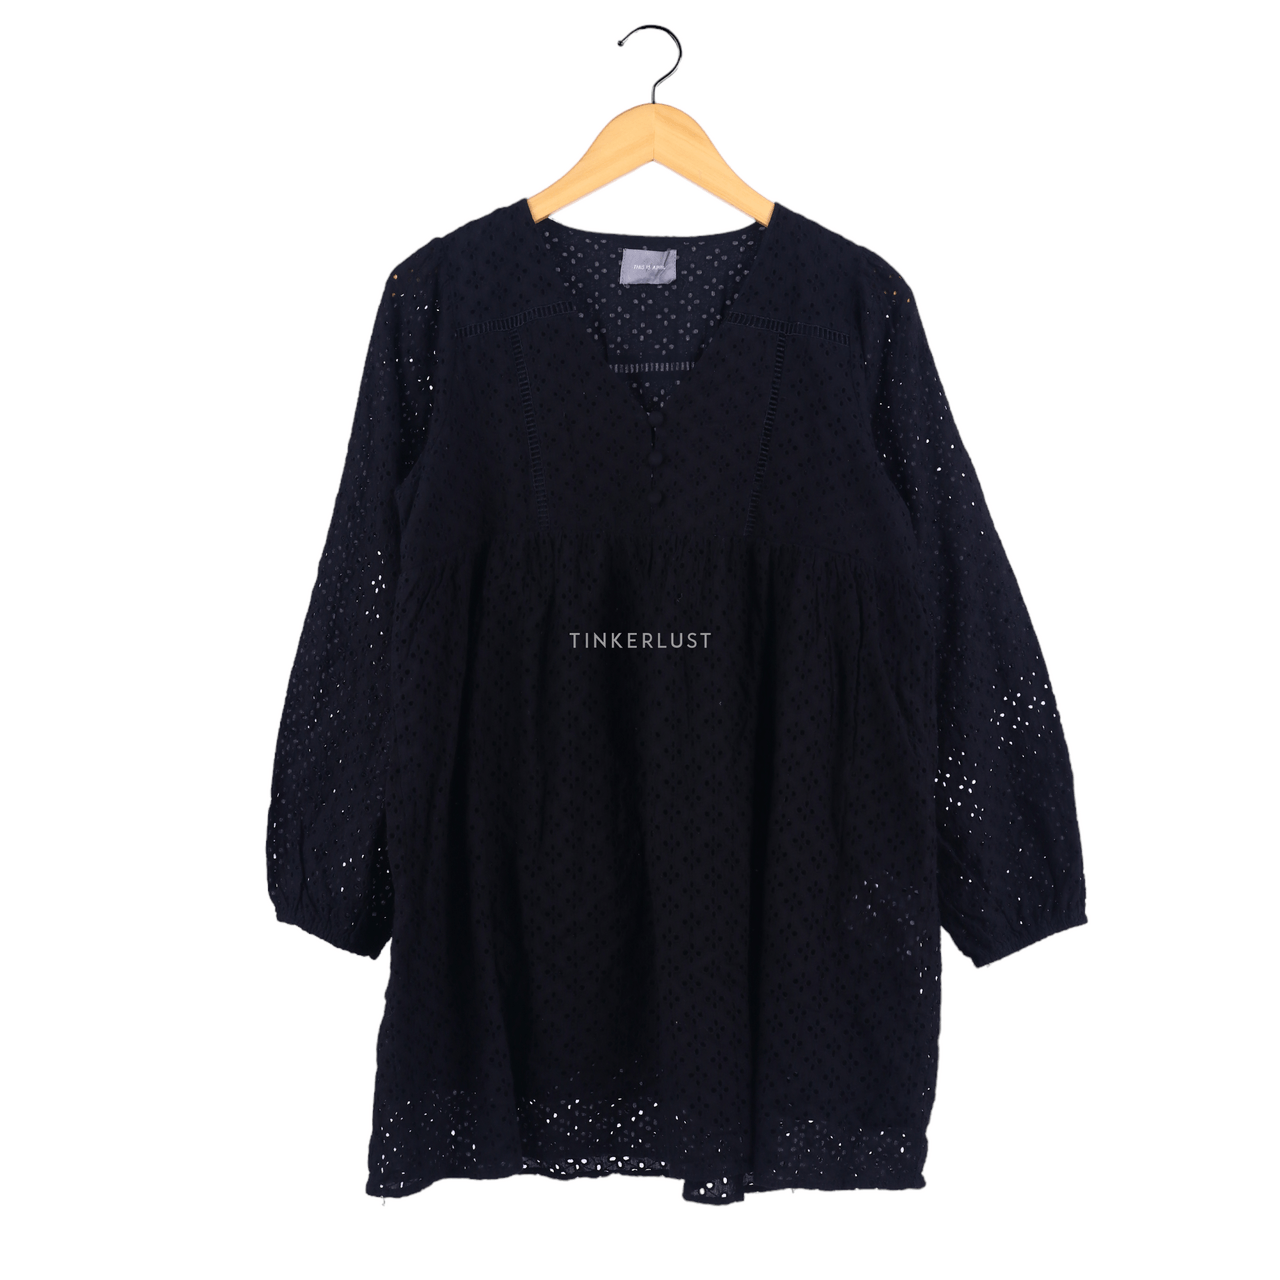 This is April Black Tunic Blouse